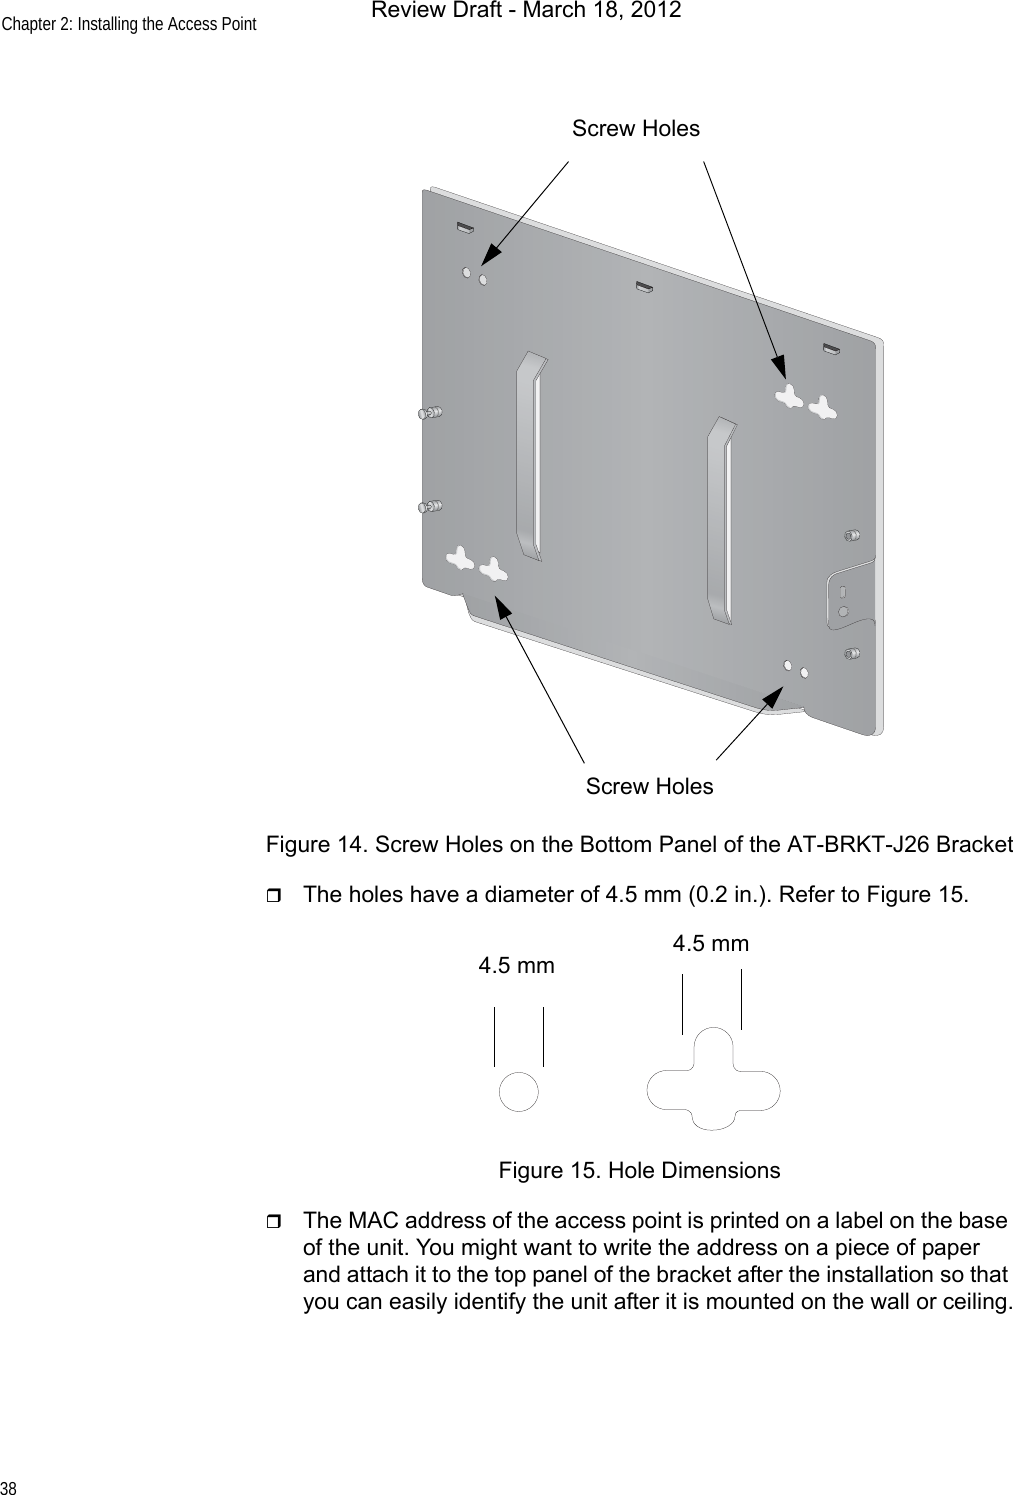 Chapter 2: Installing the Access Point38Figure 14. Screw Holes on the Bottom Panel of the AT-BRKT-J26 BracketThe holes have a diameter of 4.5 mm (0.2 in.). Refer to Figure 15.Figure 15. Hole DimensionsThe MAC address of the access point is printed on a label on the base of the unit. You might want to write the address on a piece of paper and attach it to the top panel of the bracket after the installation so that you can easily identify the unit after it is mounted on the wall or ceiling.Screw HolesScrew Holes4.5 mm 4.5 mmReview Draft - March 18, 2012